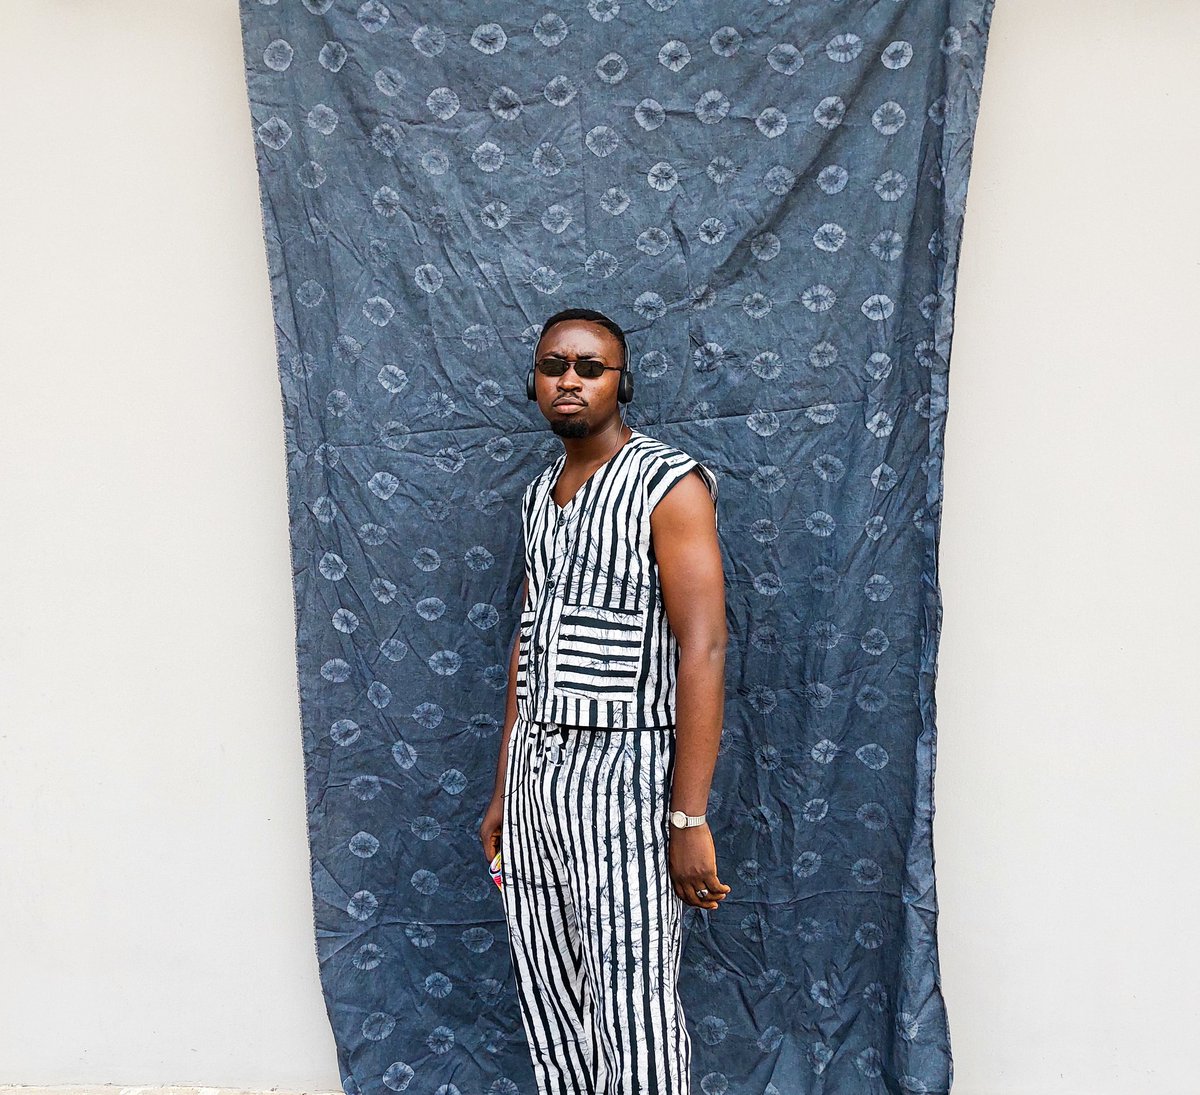 We can have the stripes print ready for you in fabric or outfit.
5yards Cotton: #15000
Guinea Brocade: #16000
Silk: #37000
Chiffon -#29500
Outfit -#30000

#ekiexhibits #embracetheadirelife #adire #adirefashion #adirestyles #adireafricantextiles #fashion #fashionstyle